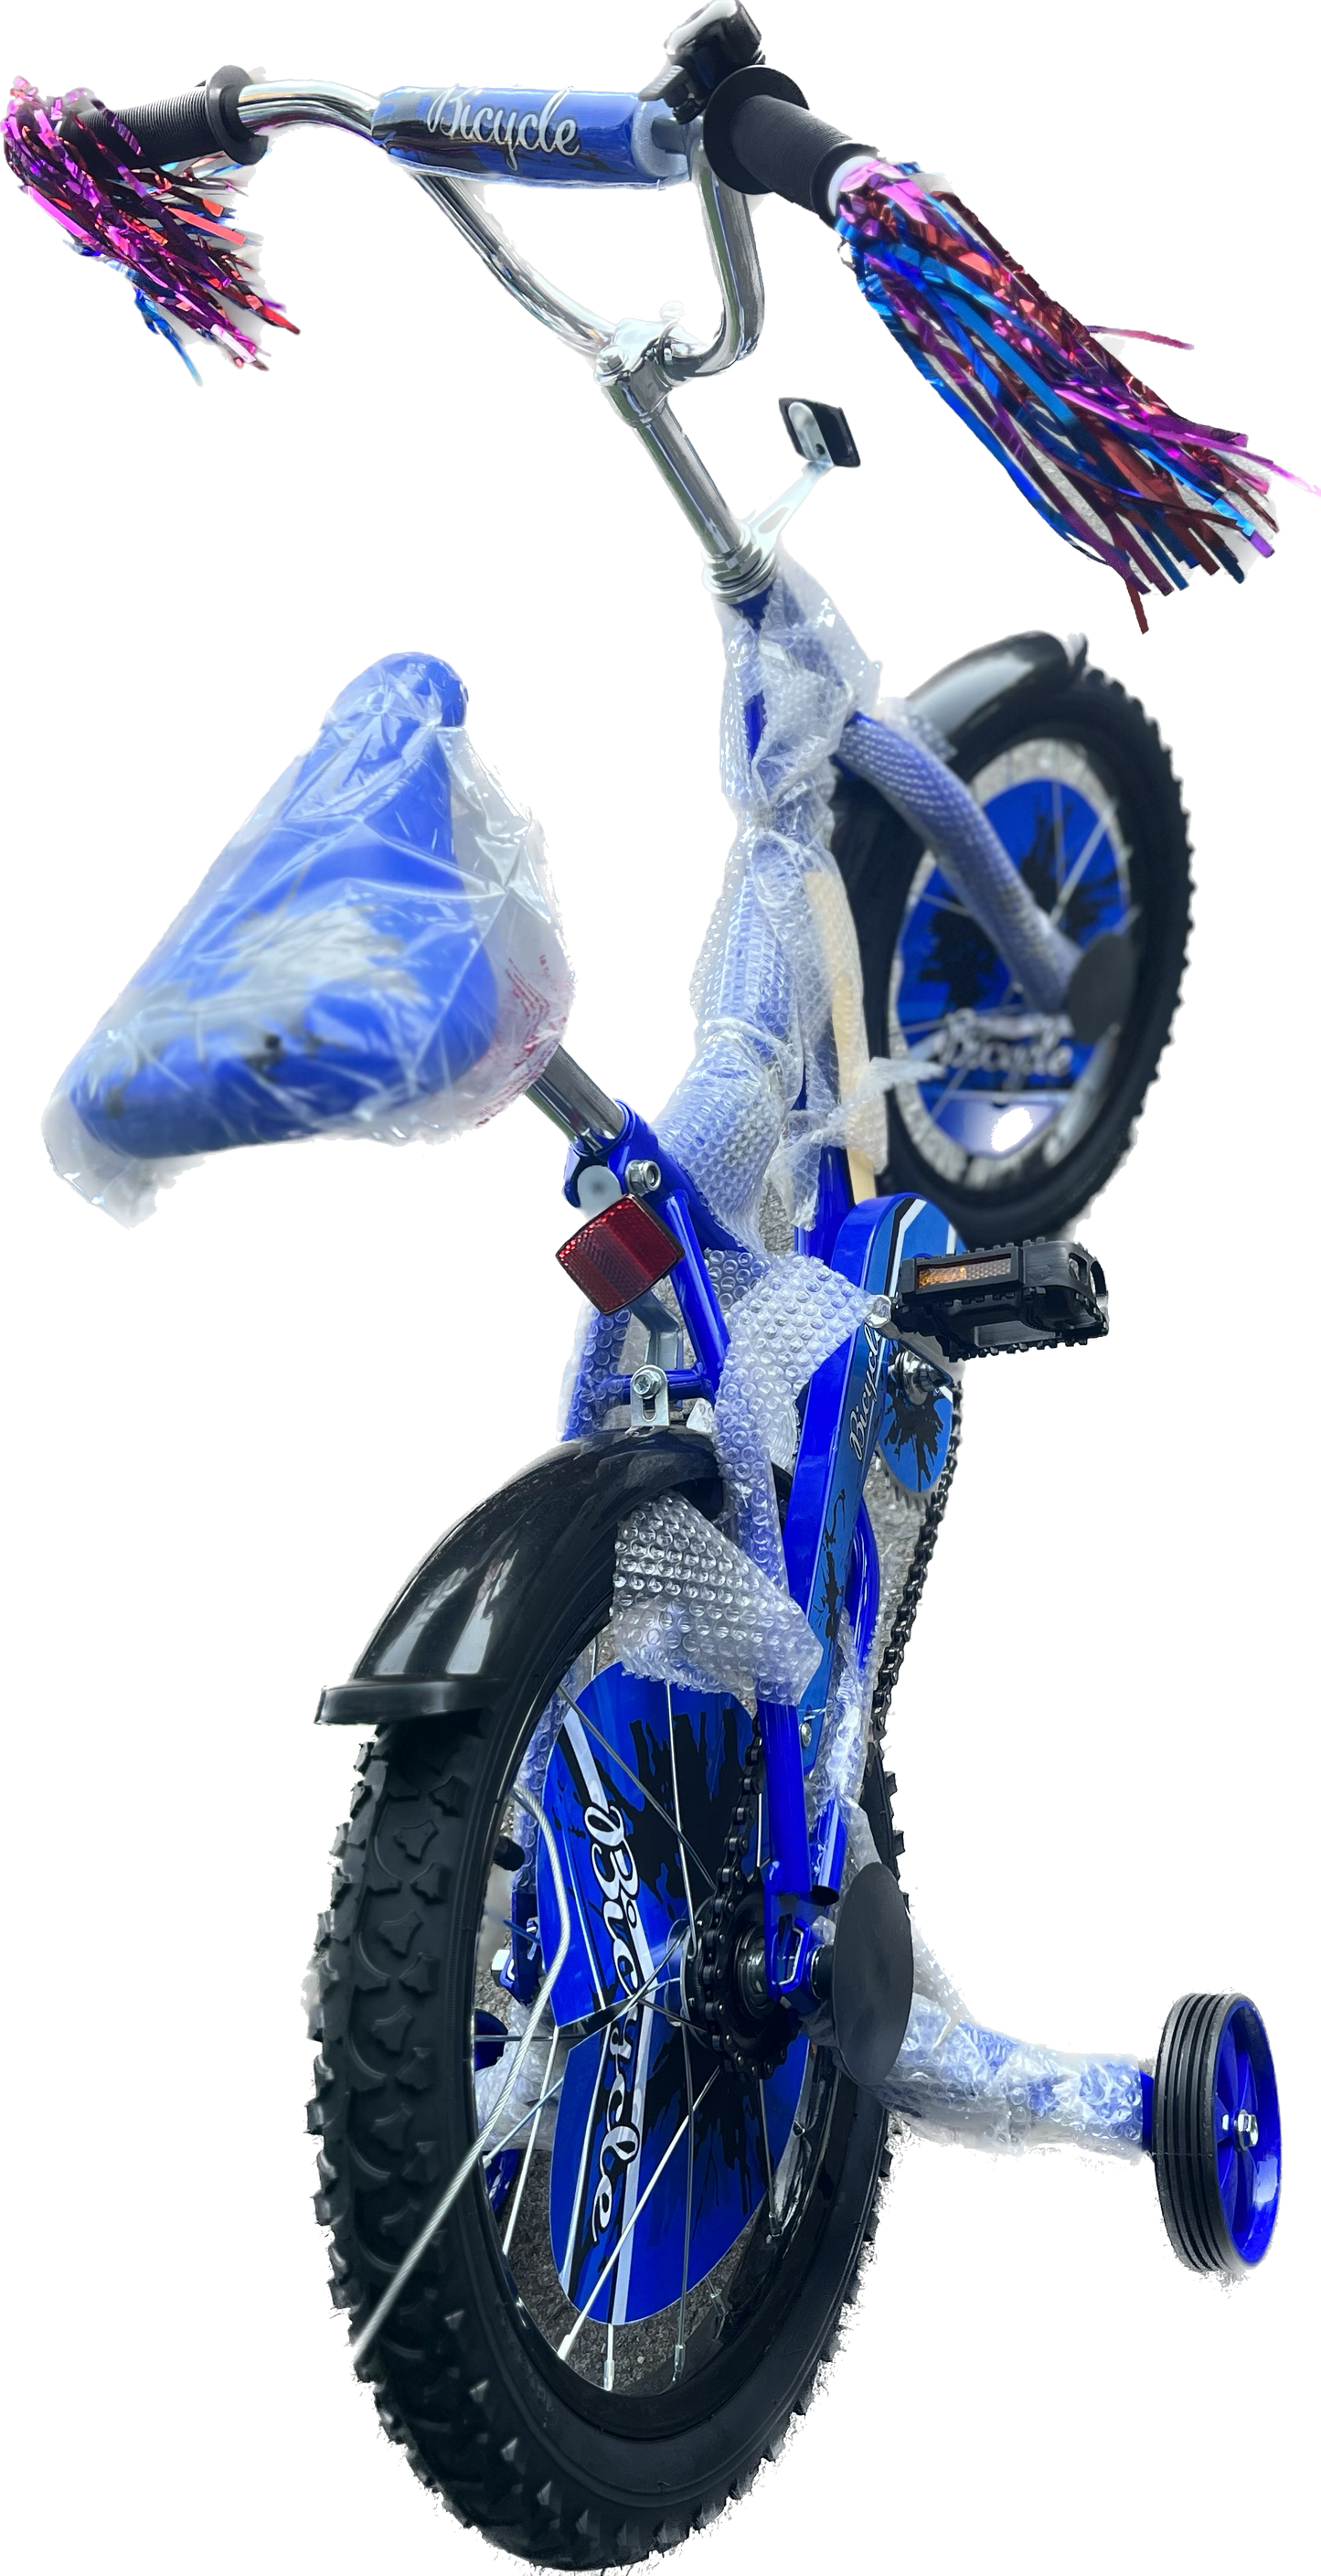 16-inch blue bicycle